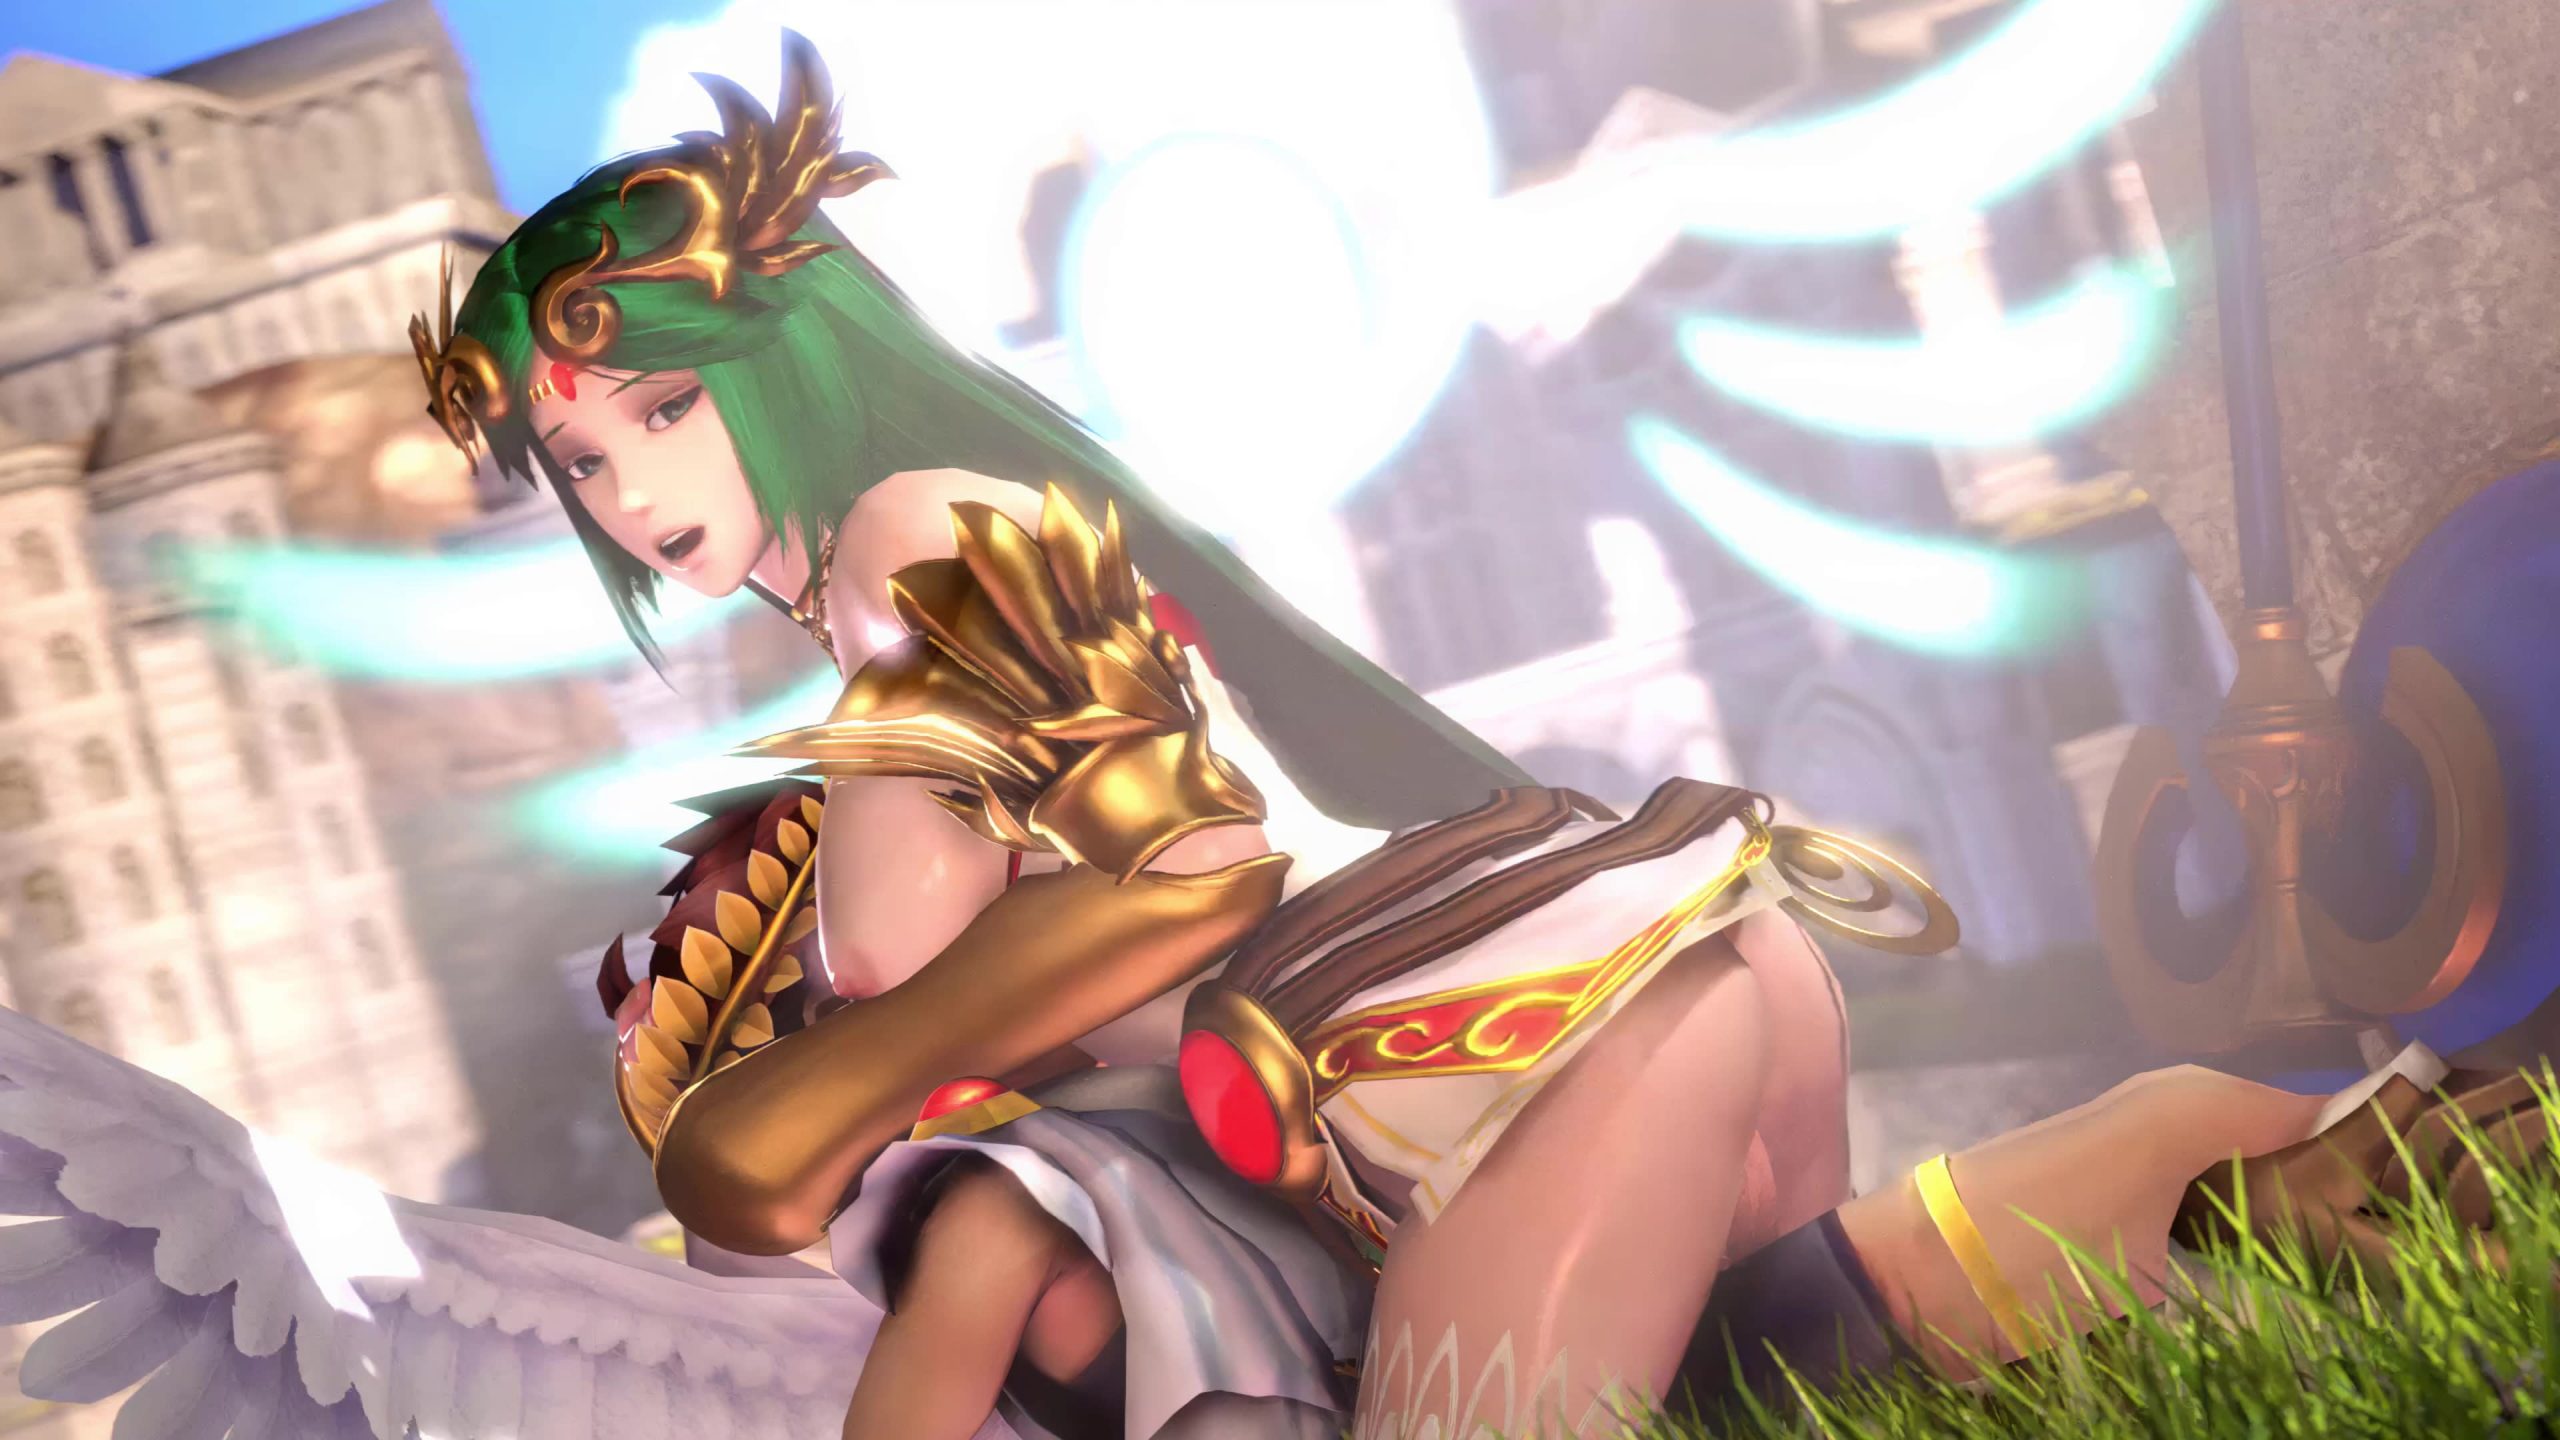 Palutena Rides Young Cock Of Pit In Cowgirl Position – Kid Icarus NSFW animation thumbnail